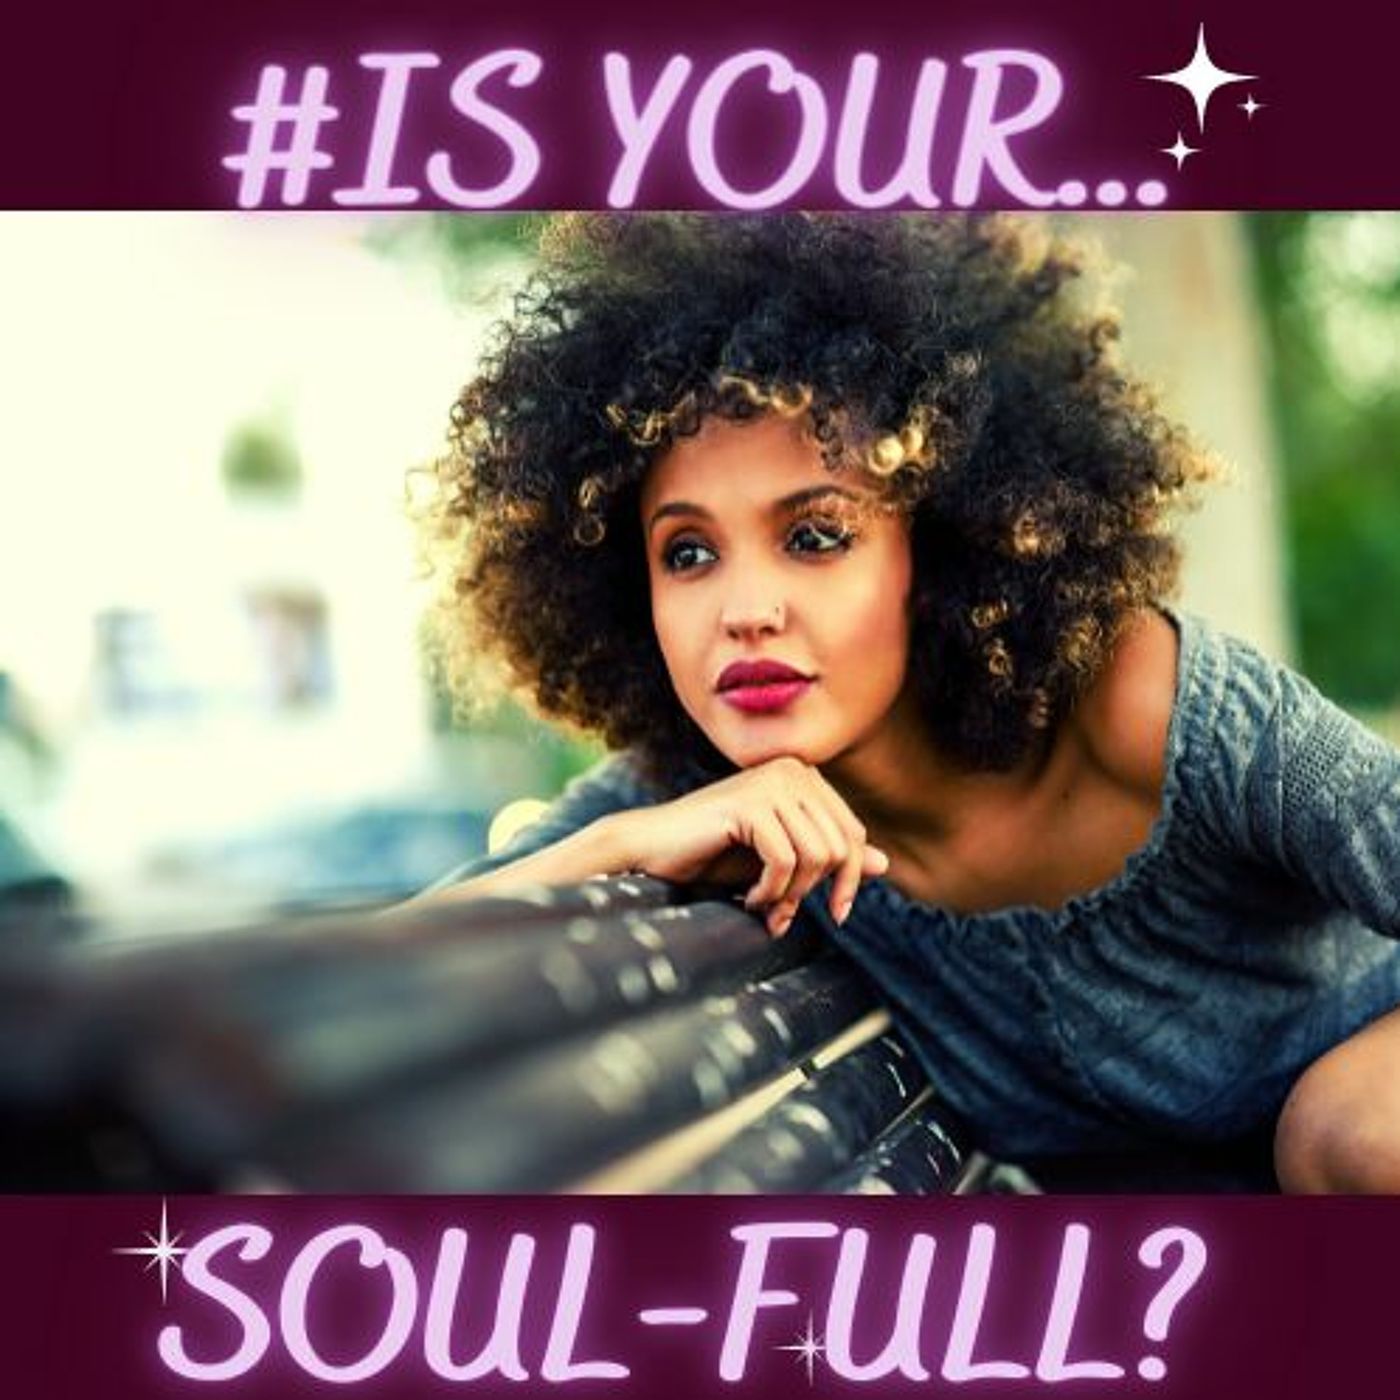 #Is Your Soul-Full!